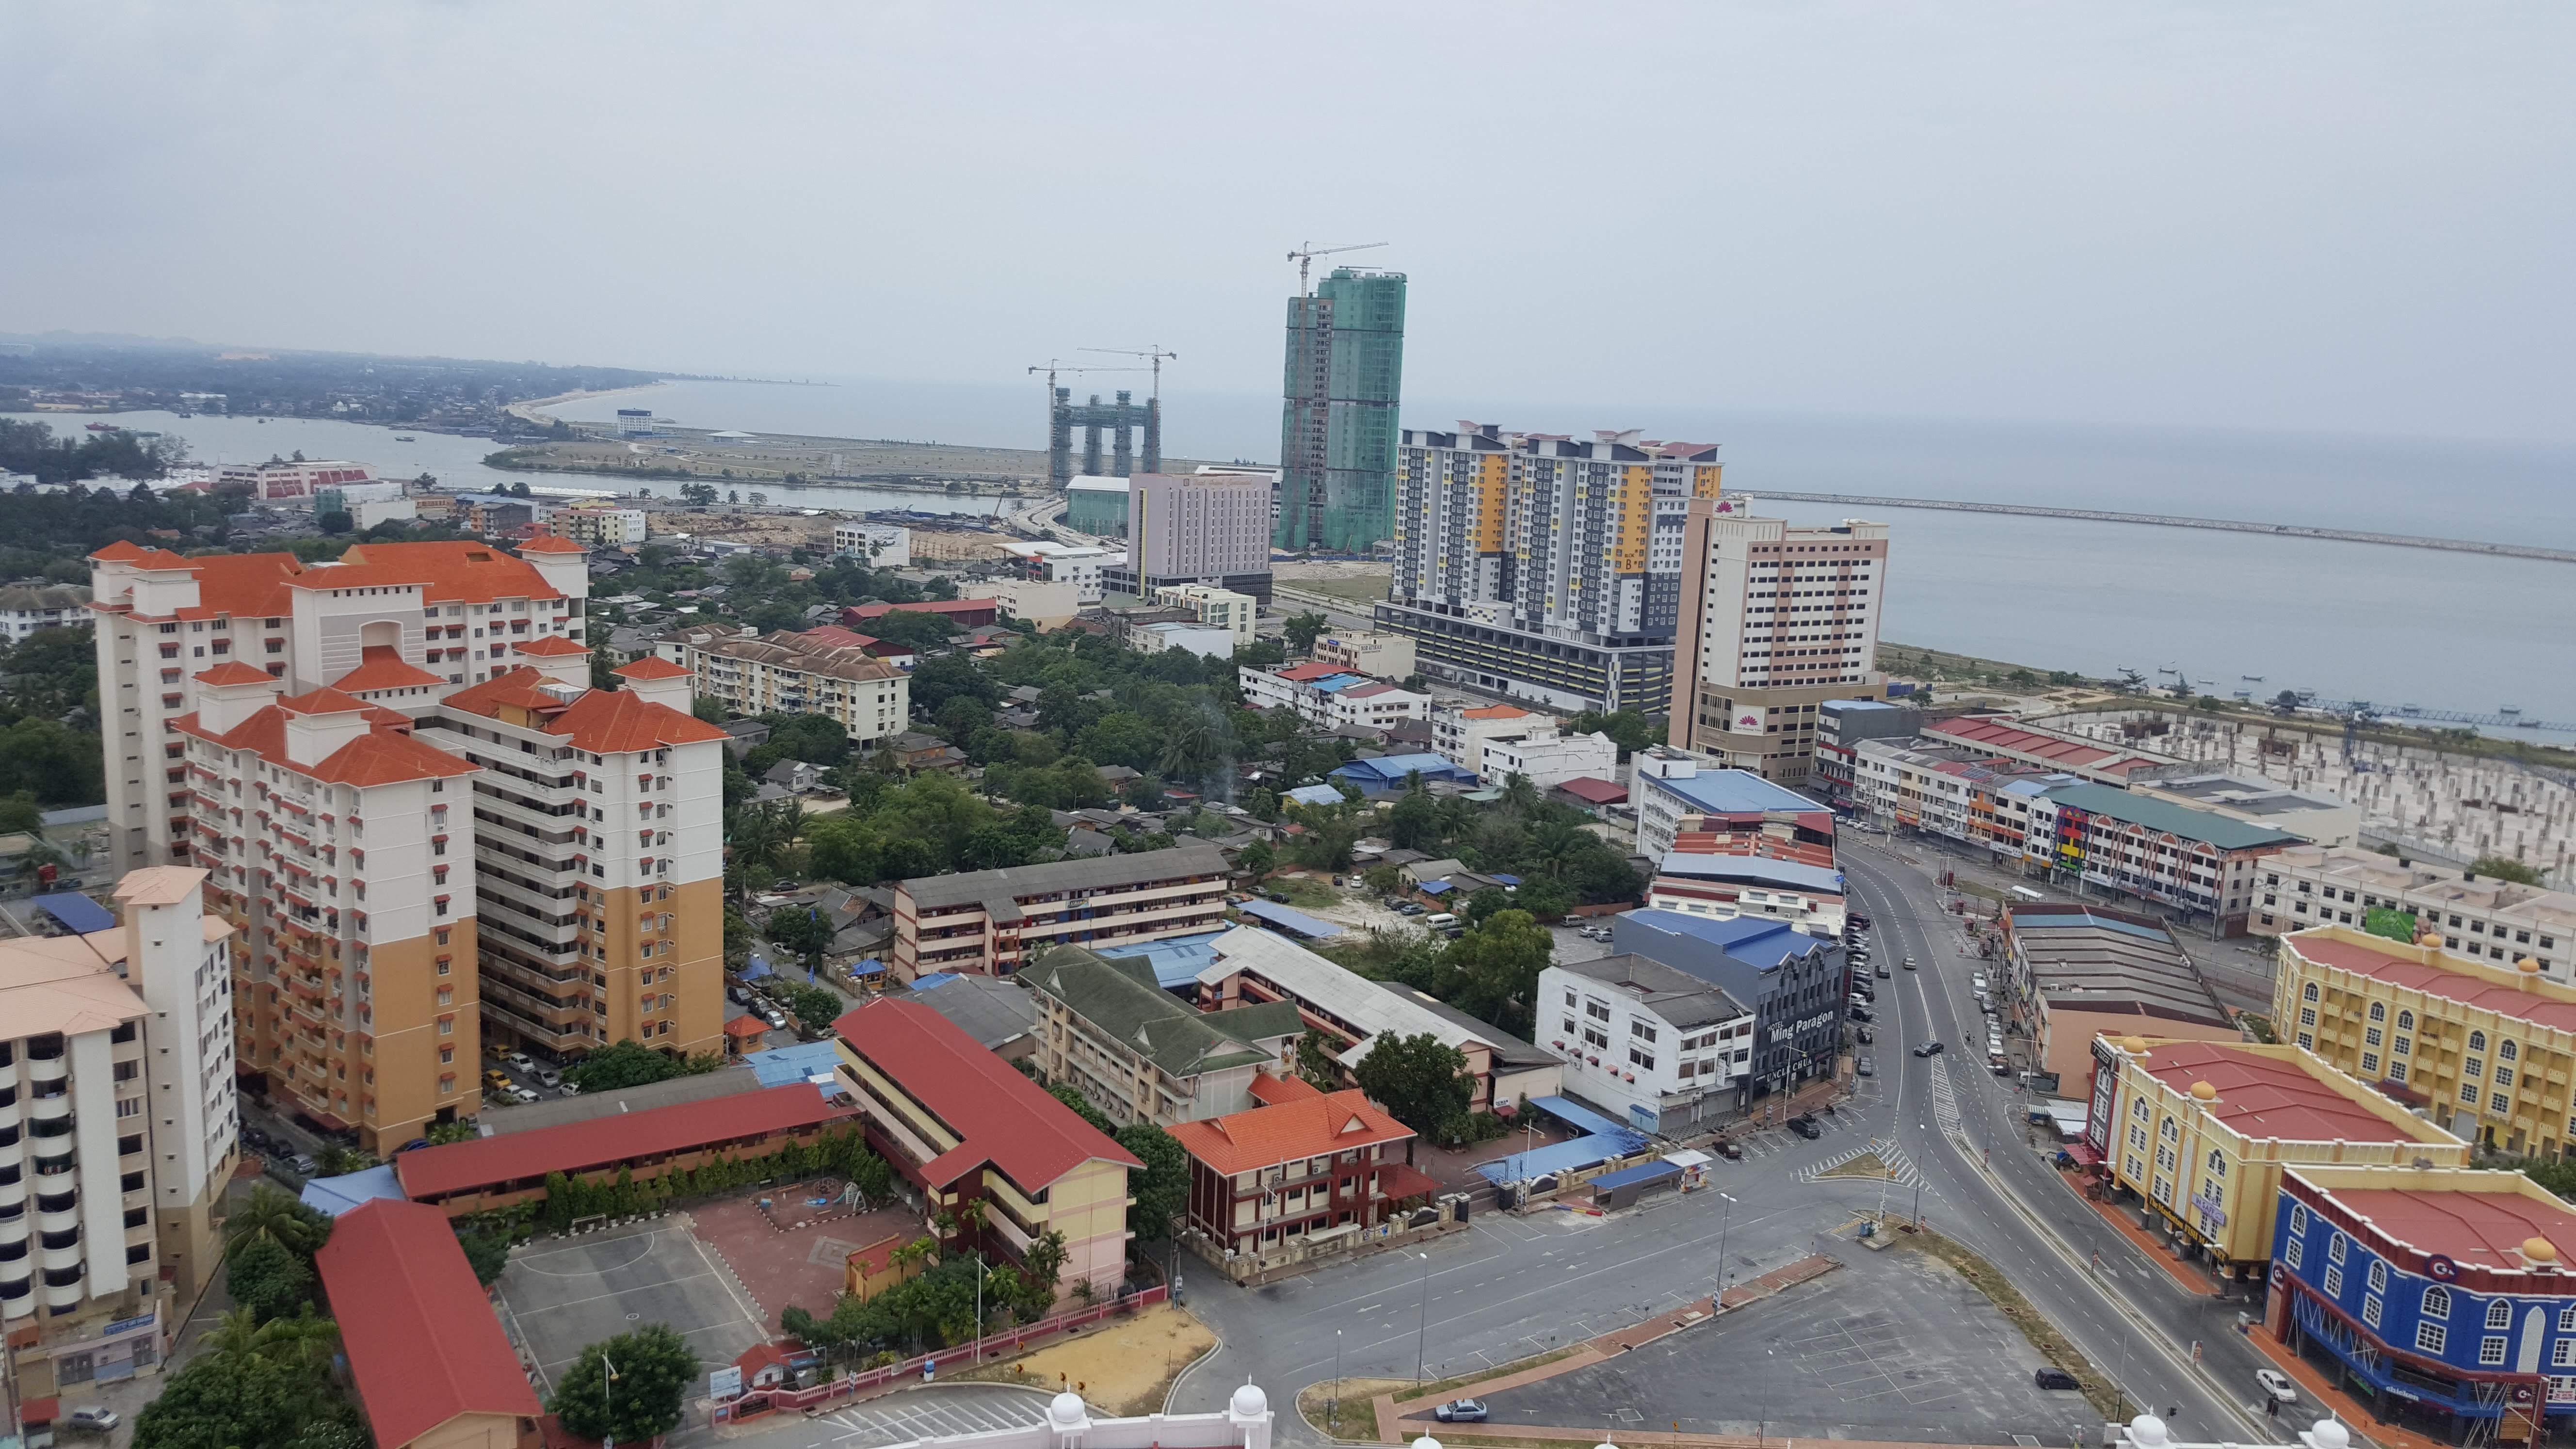 Another beautiful, waterfront town is under construction in Kuala Terengganu, Malaysia